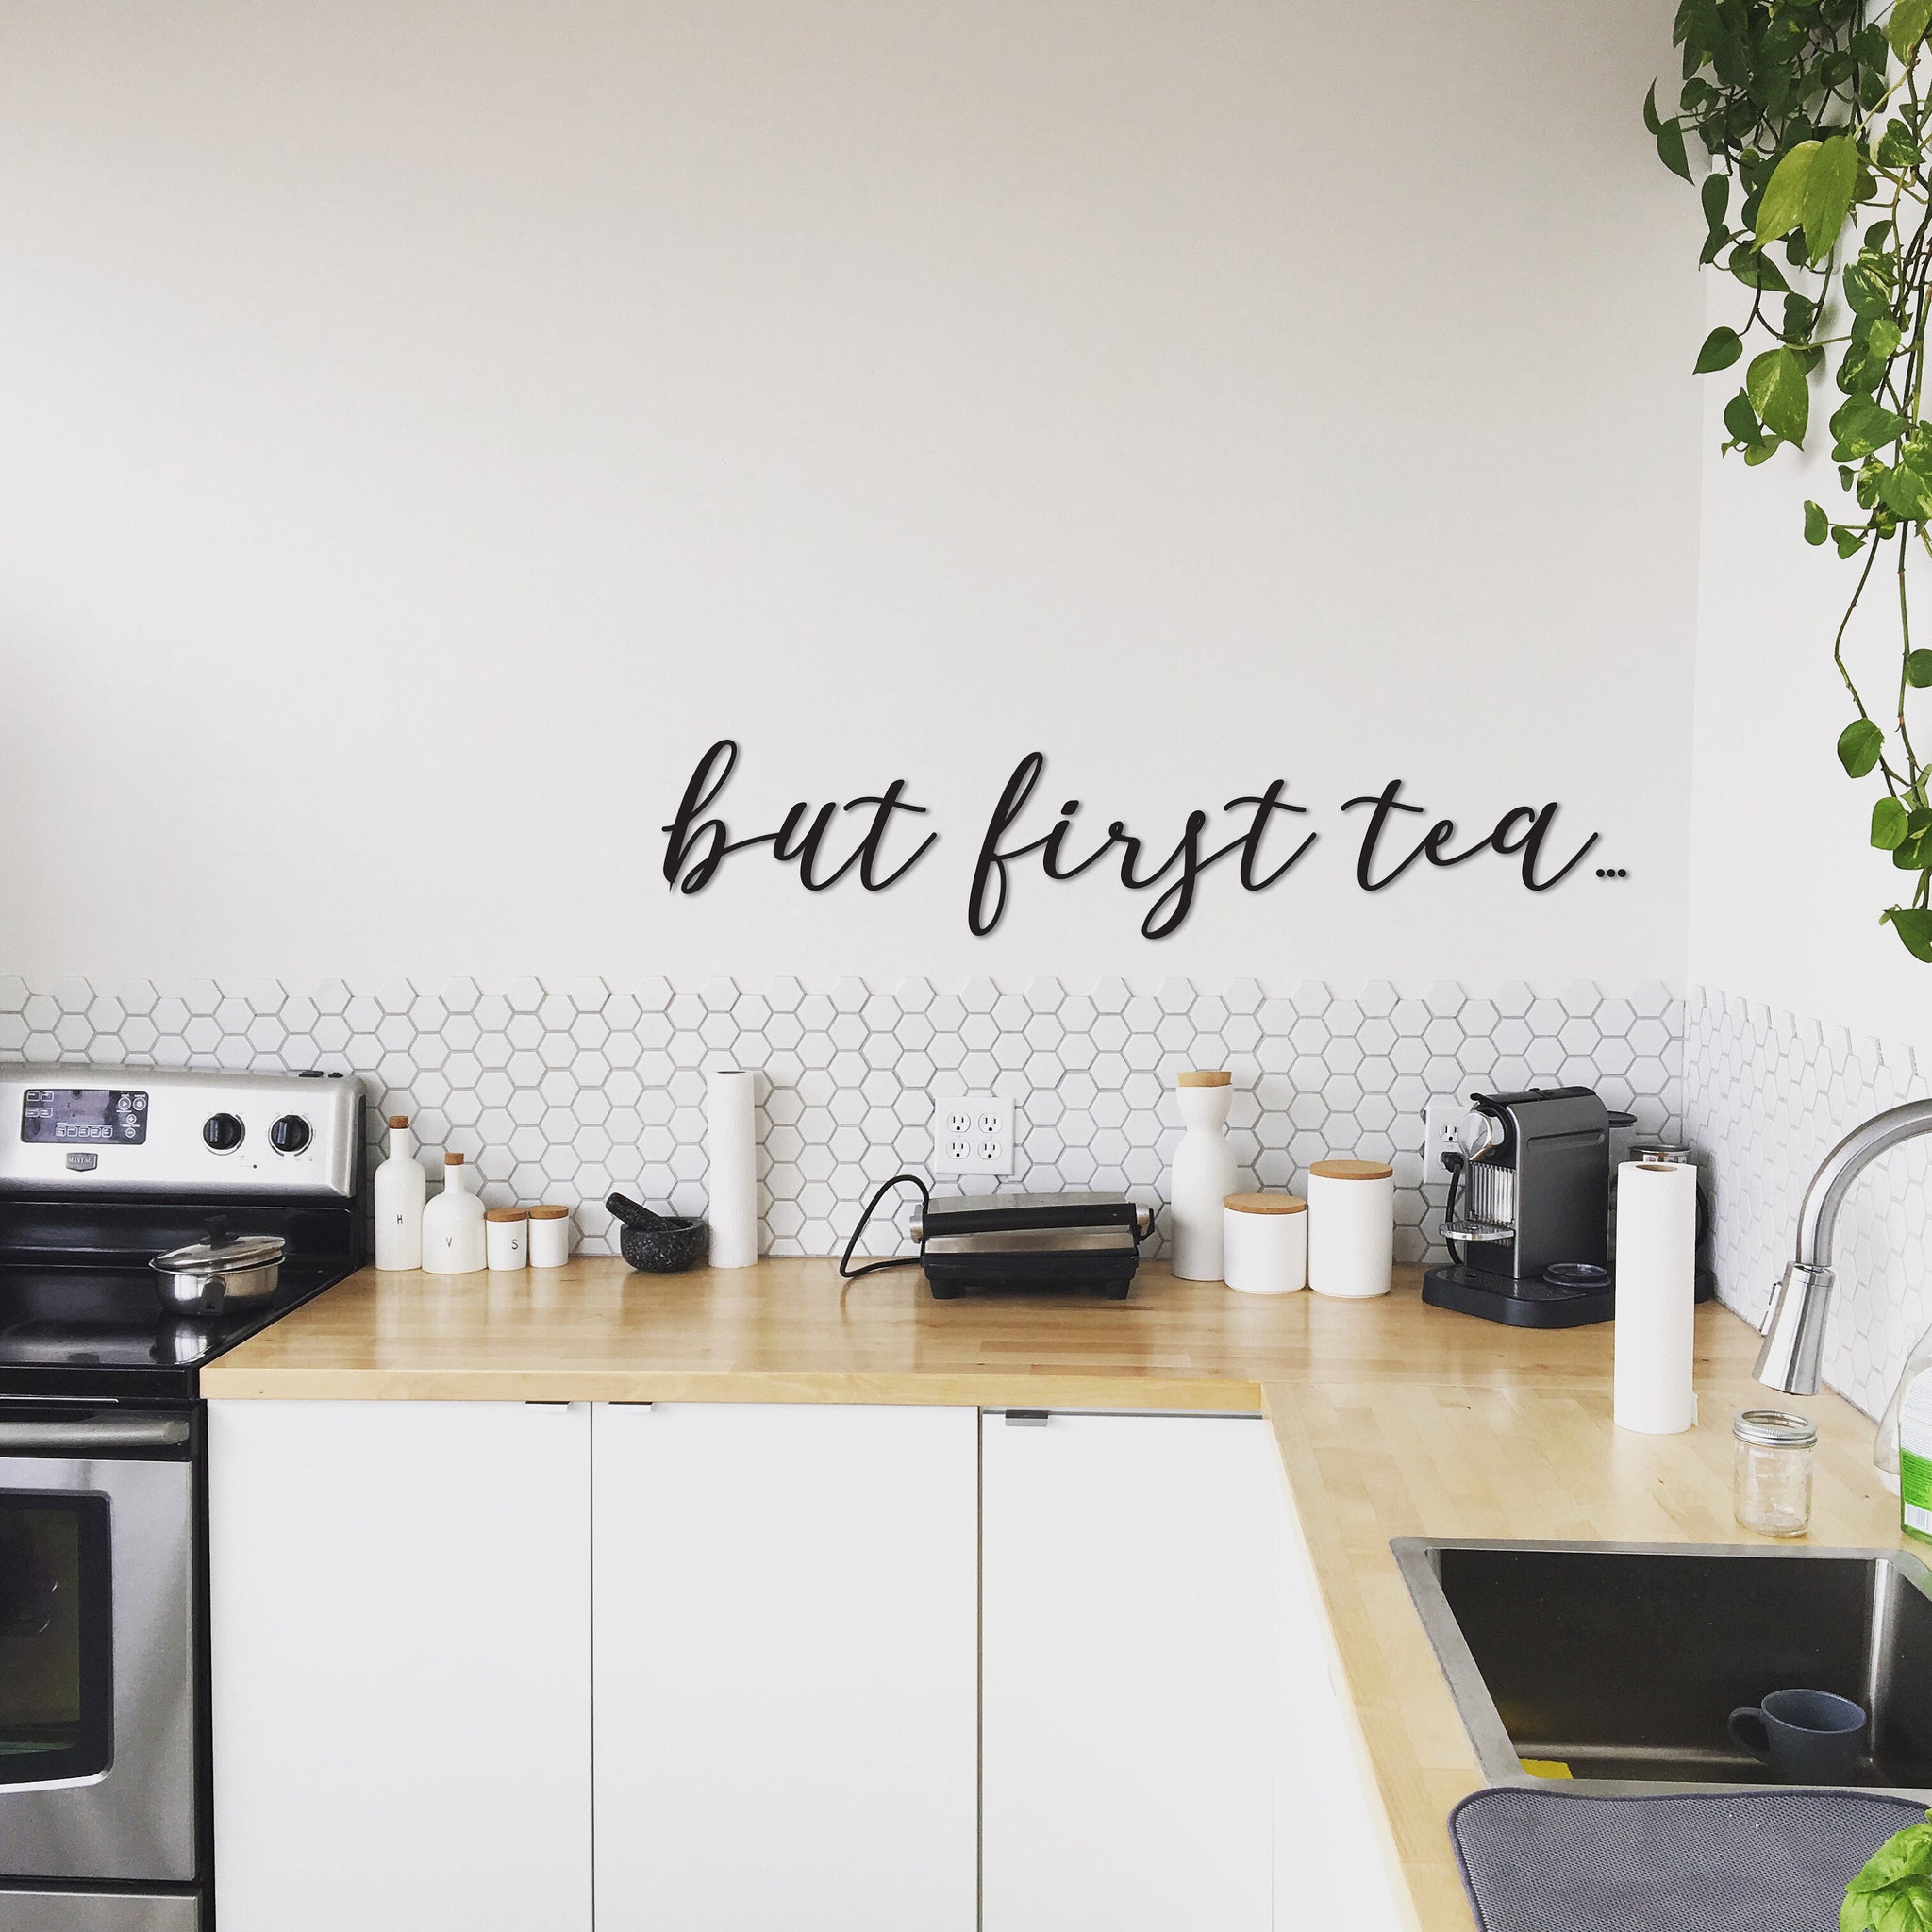 "But first tea" 3D decal kitchen wall art quote sign